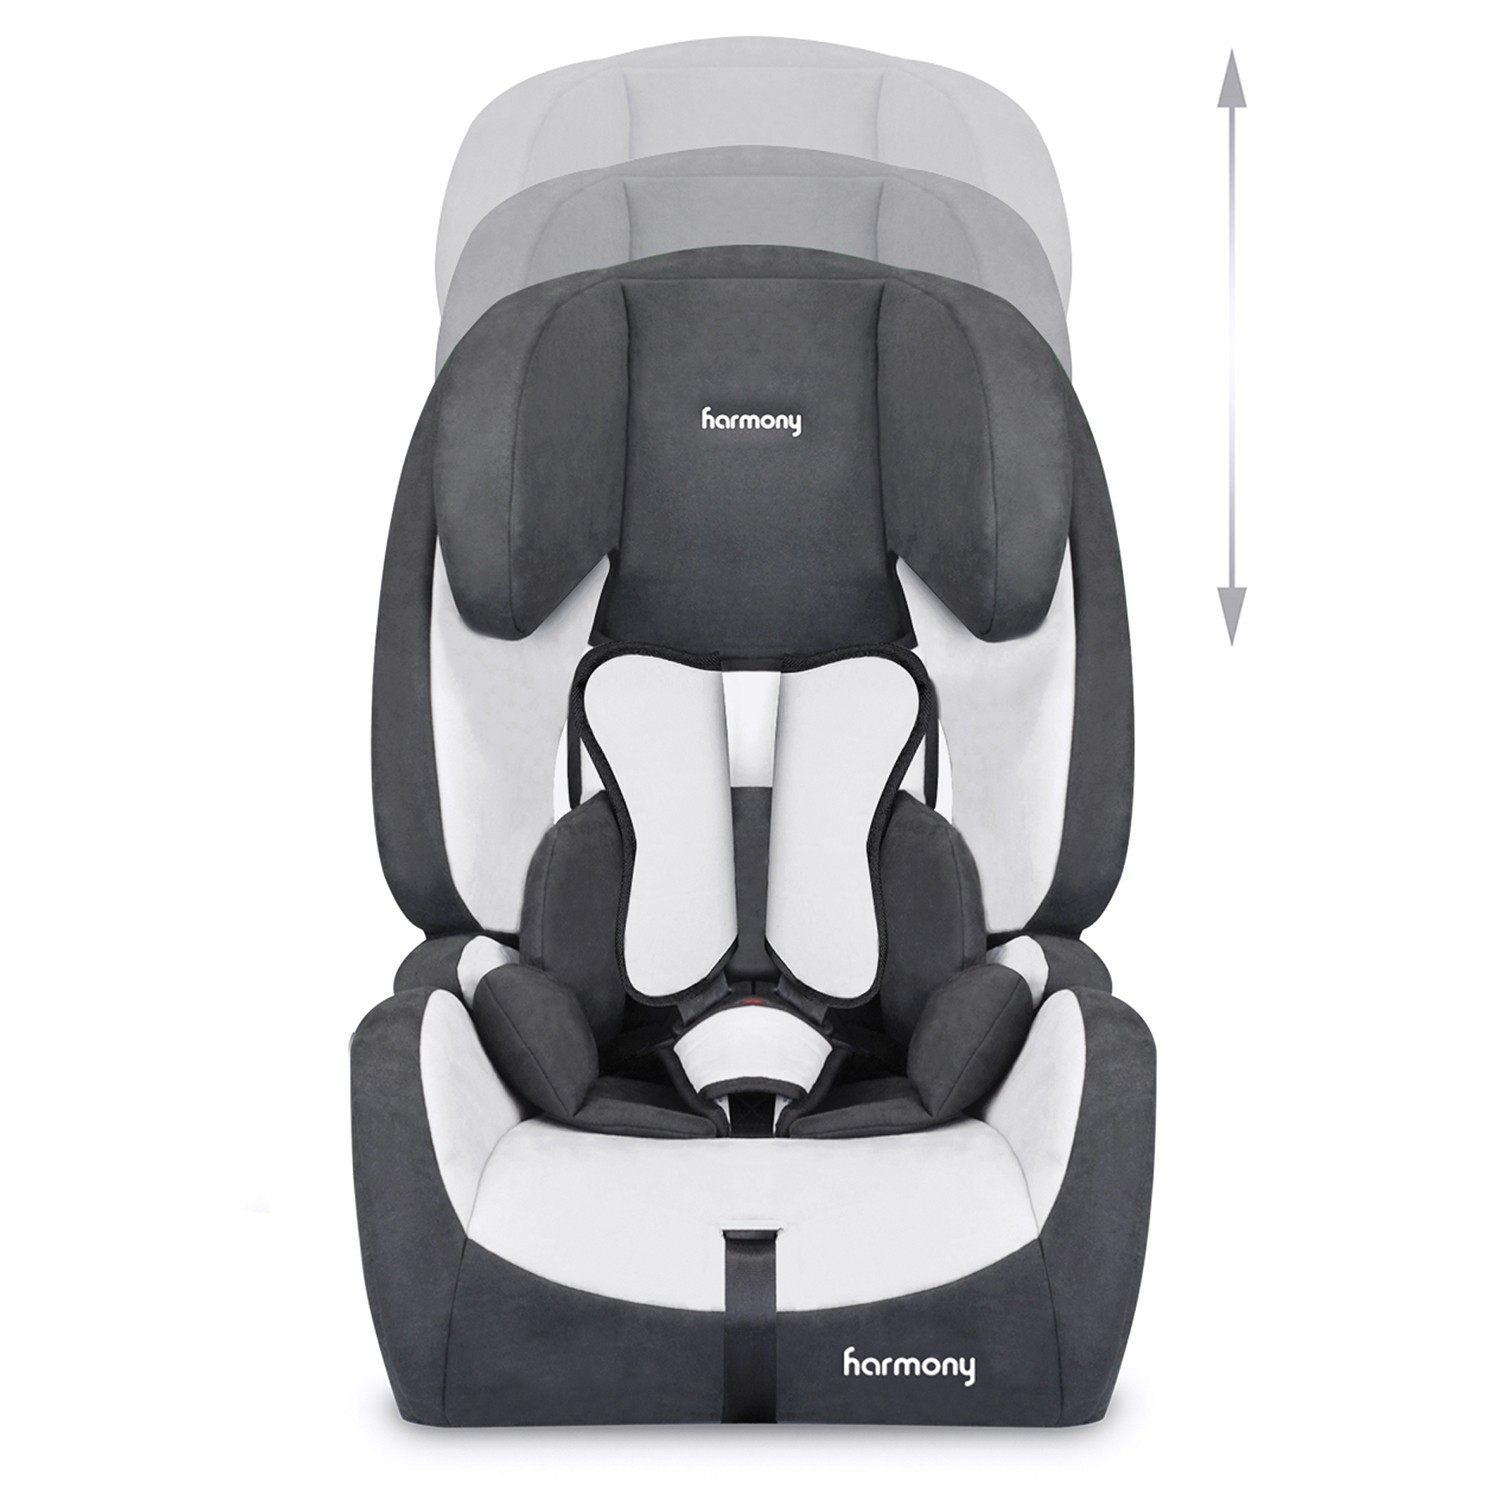 Genesys Deluxe Harnessed Booster Seat